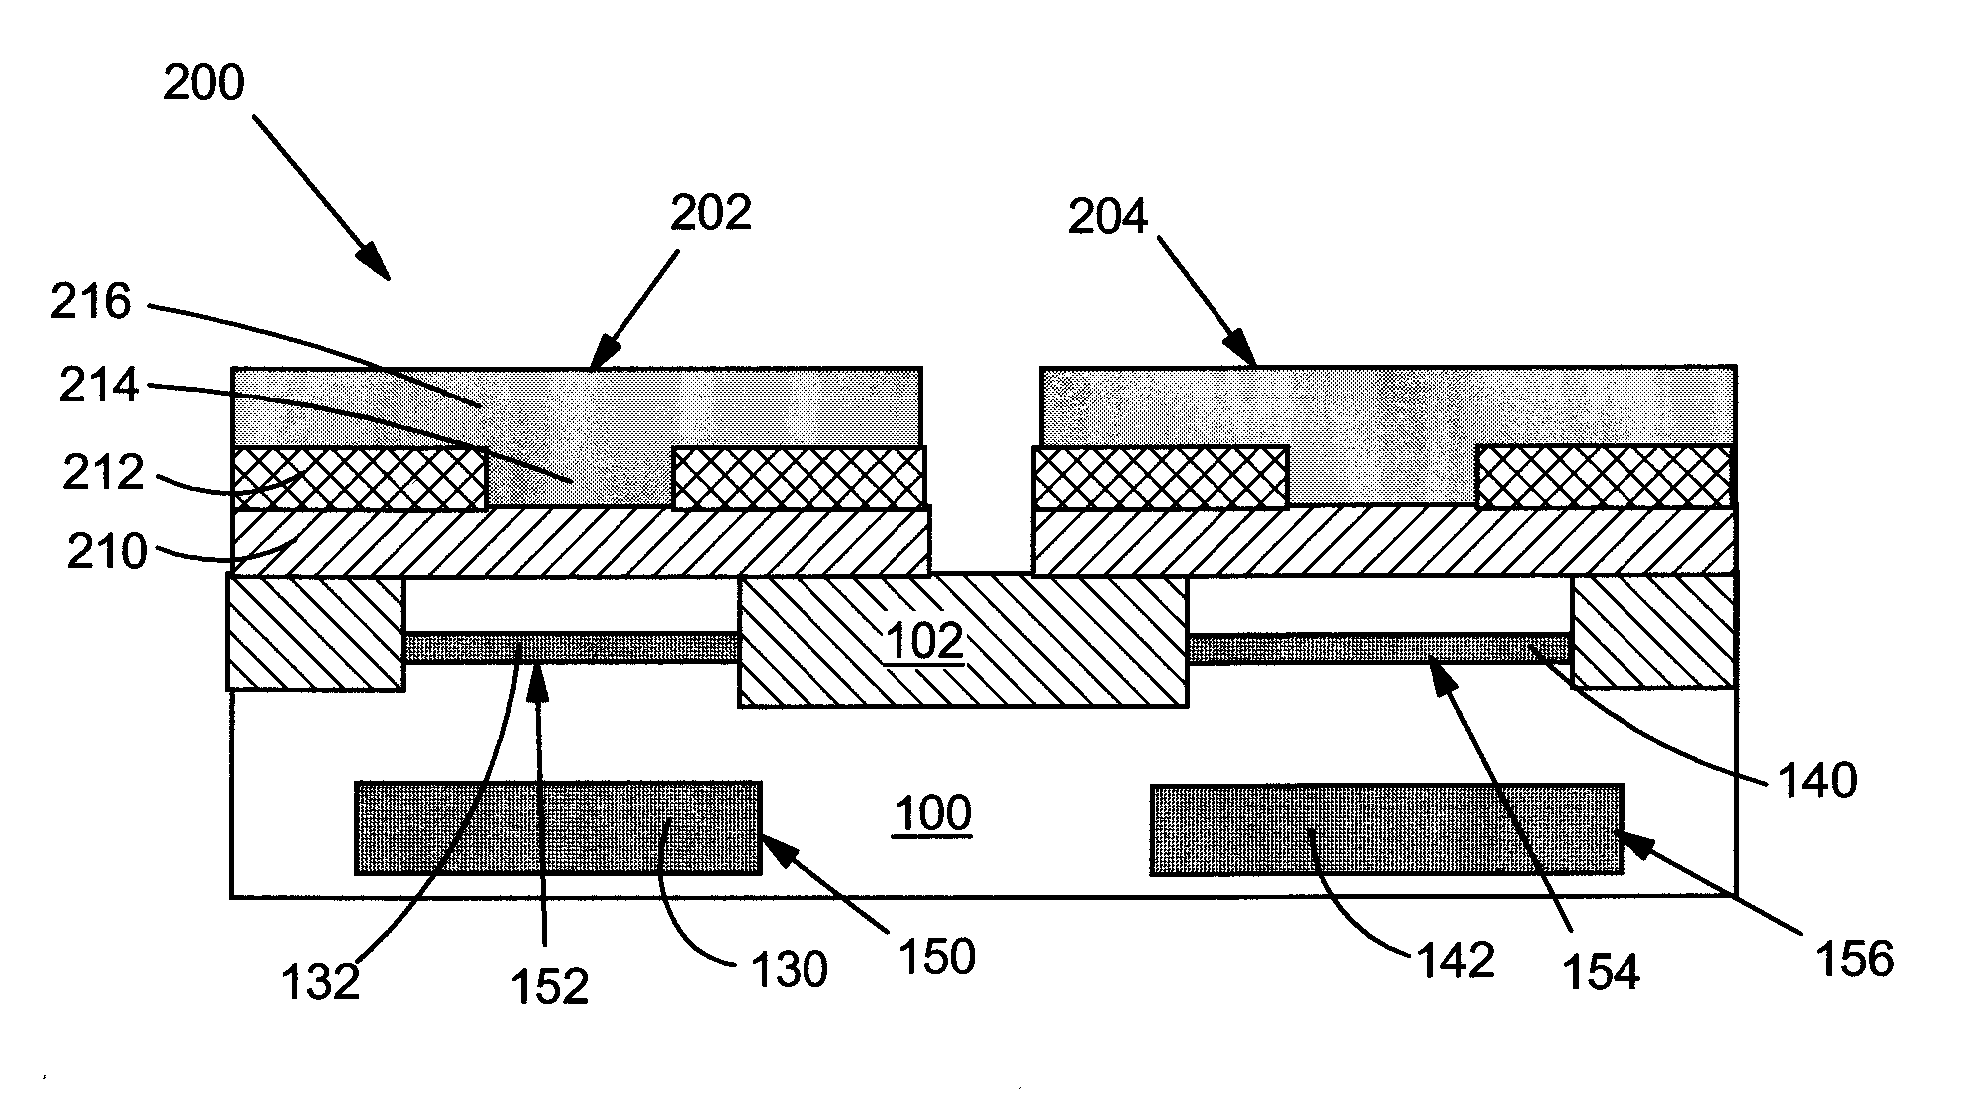 Varied impurity profile region formation for varying breakdown voltage of devices